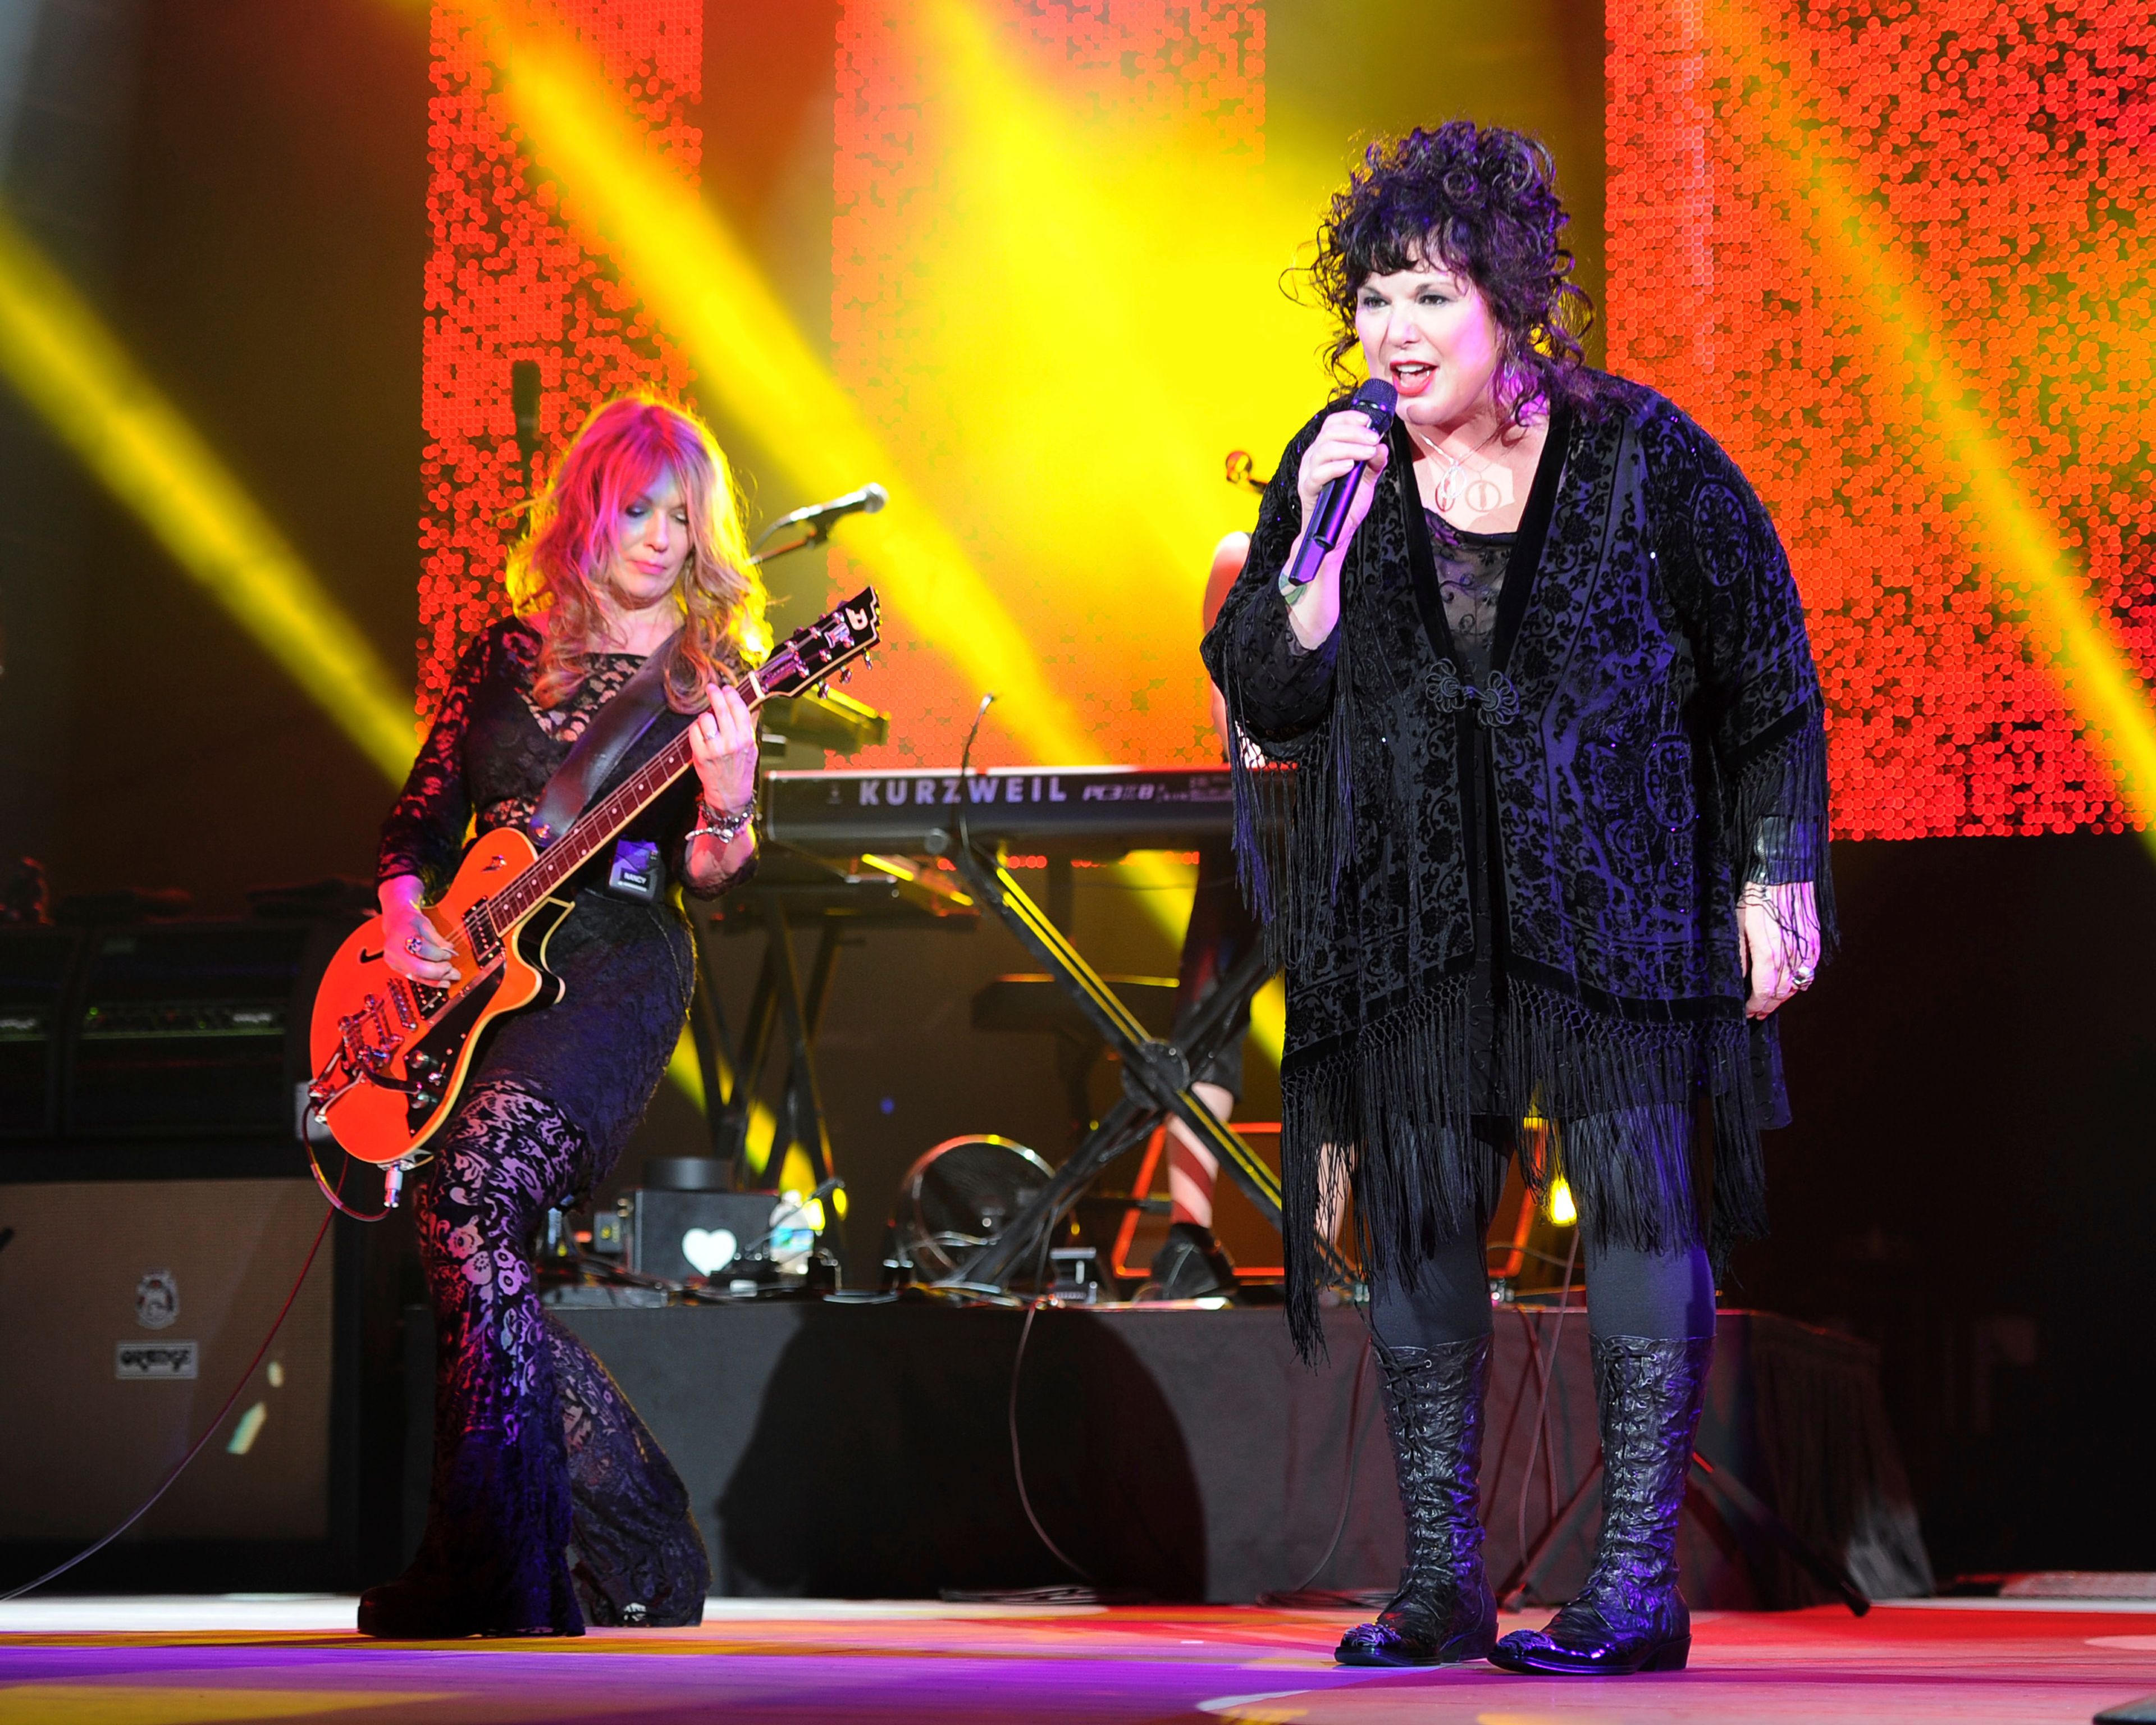 FILE - Nancy Wilson, left, and Ann Wilson of Heart perform on opening night of the Heartbreaker Tour at the Cruzan Amphitheater in West Palm Beach, Fla., June 17, 2013. Ann Wilson, lead singer of rock band Heart, says she has cancer. The band is postponing the remaining shows on its Royal Flush Tour. Wilson said in a statement Tuesday that she underwent a surgery to remove a cancerous growth and is recovering steadily, but that her doctors urged her to undergo preventive chemotherapy and take time off from performing. (Photo by Jeff Daly/Invision/AP, File)